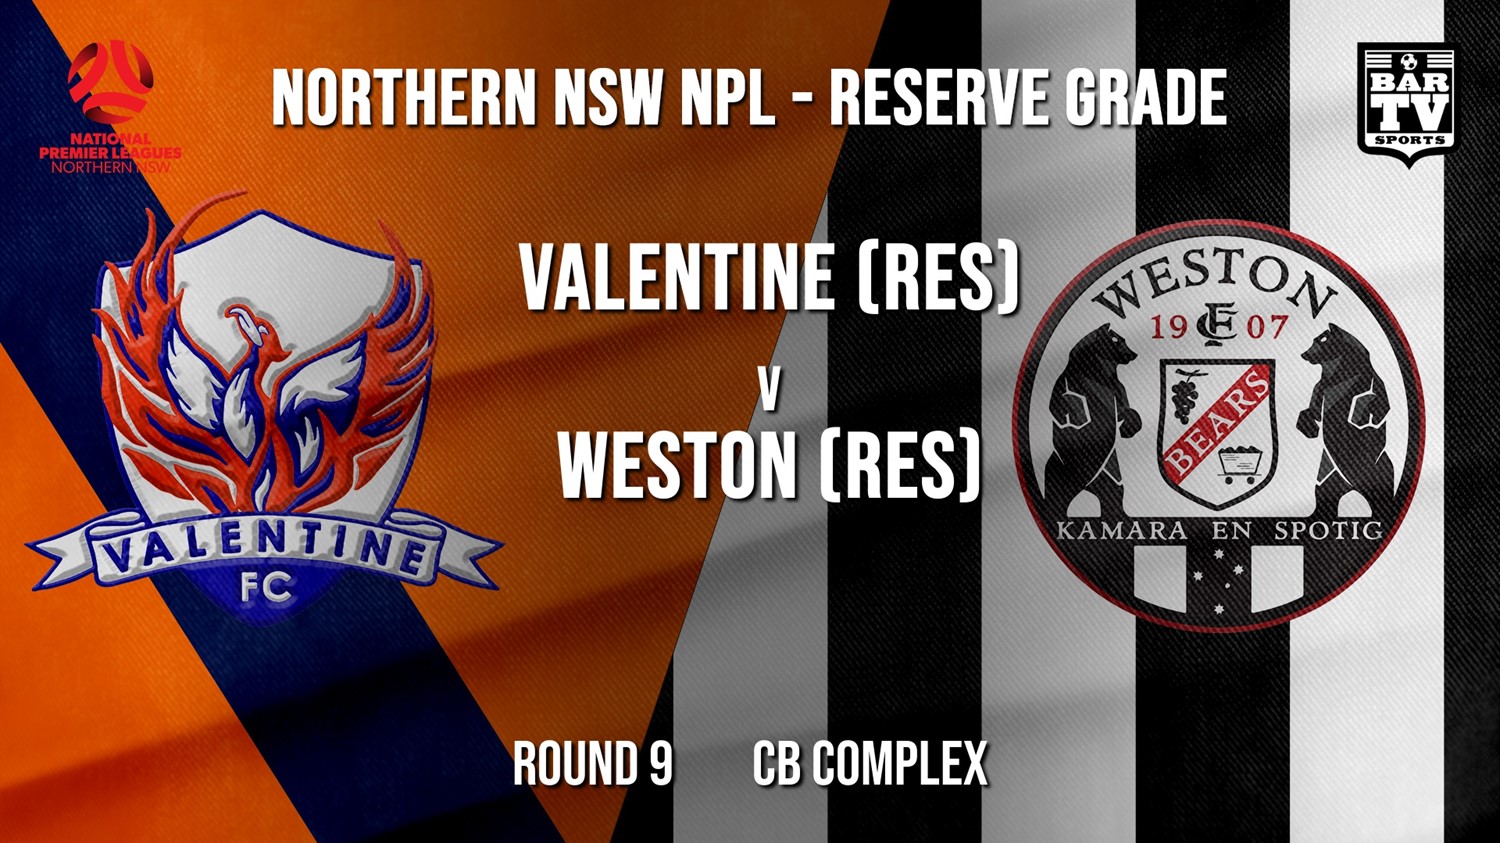 NPL NNSW RES Round 9 - Valentine Phoenix FC (Res) v Weston Workers FC (Res) Minigame Slate Image